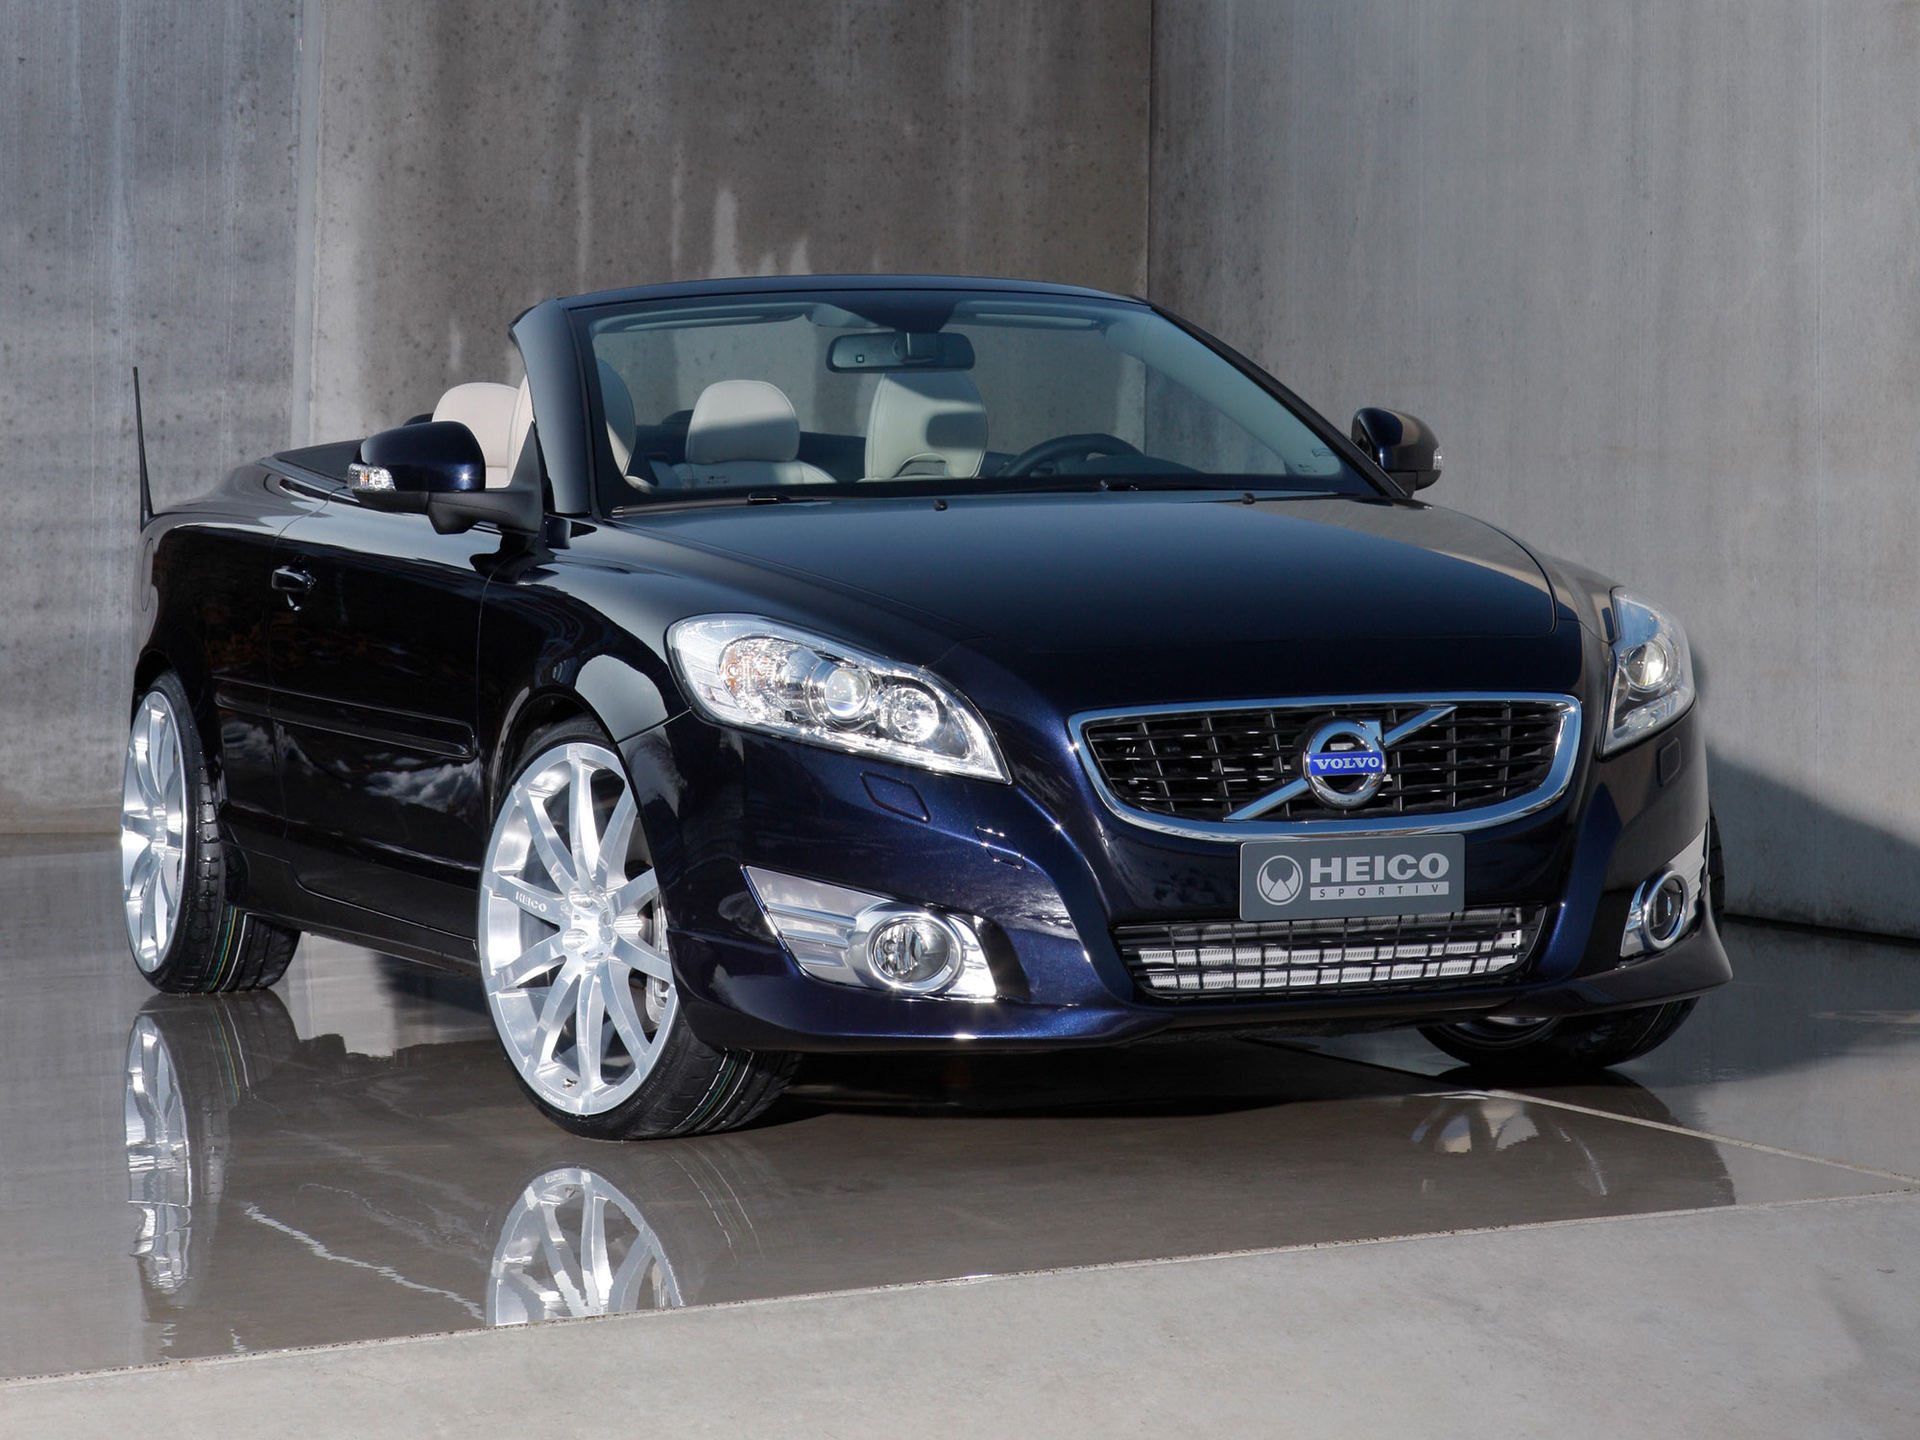 Download HQ blue cabriolet heico front Volvo wallpaper / 1920x1440